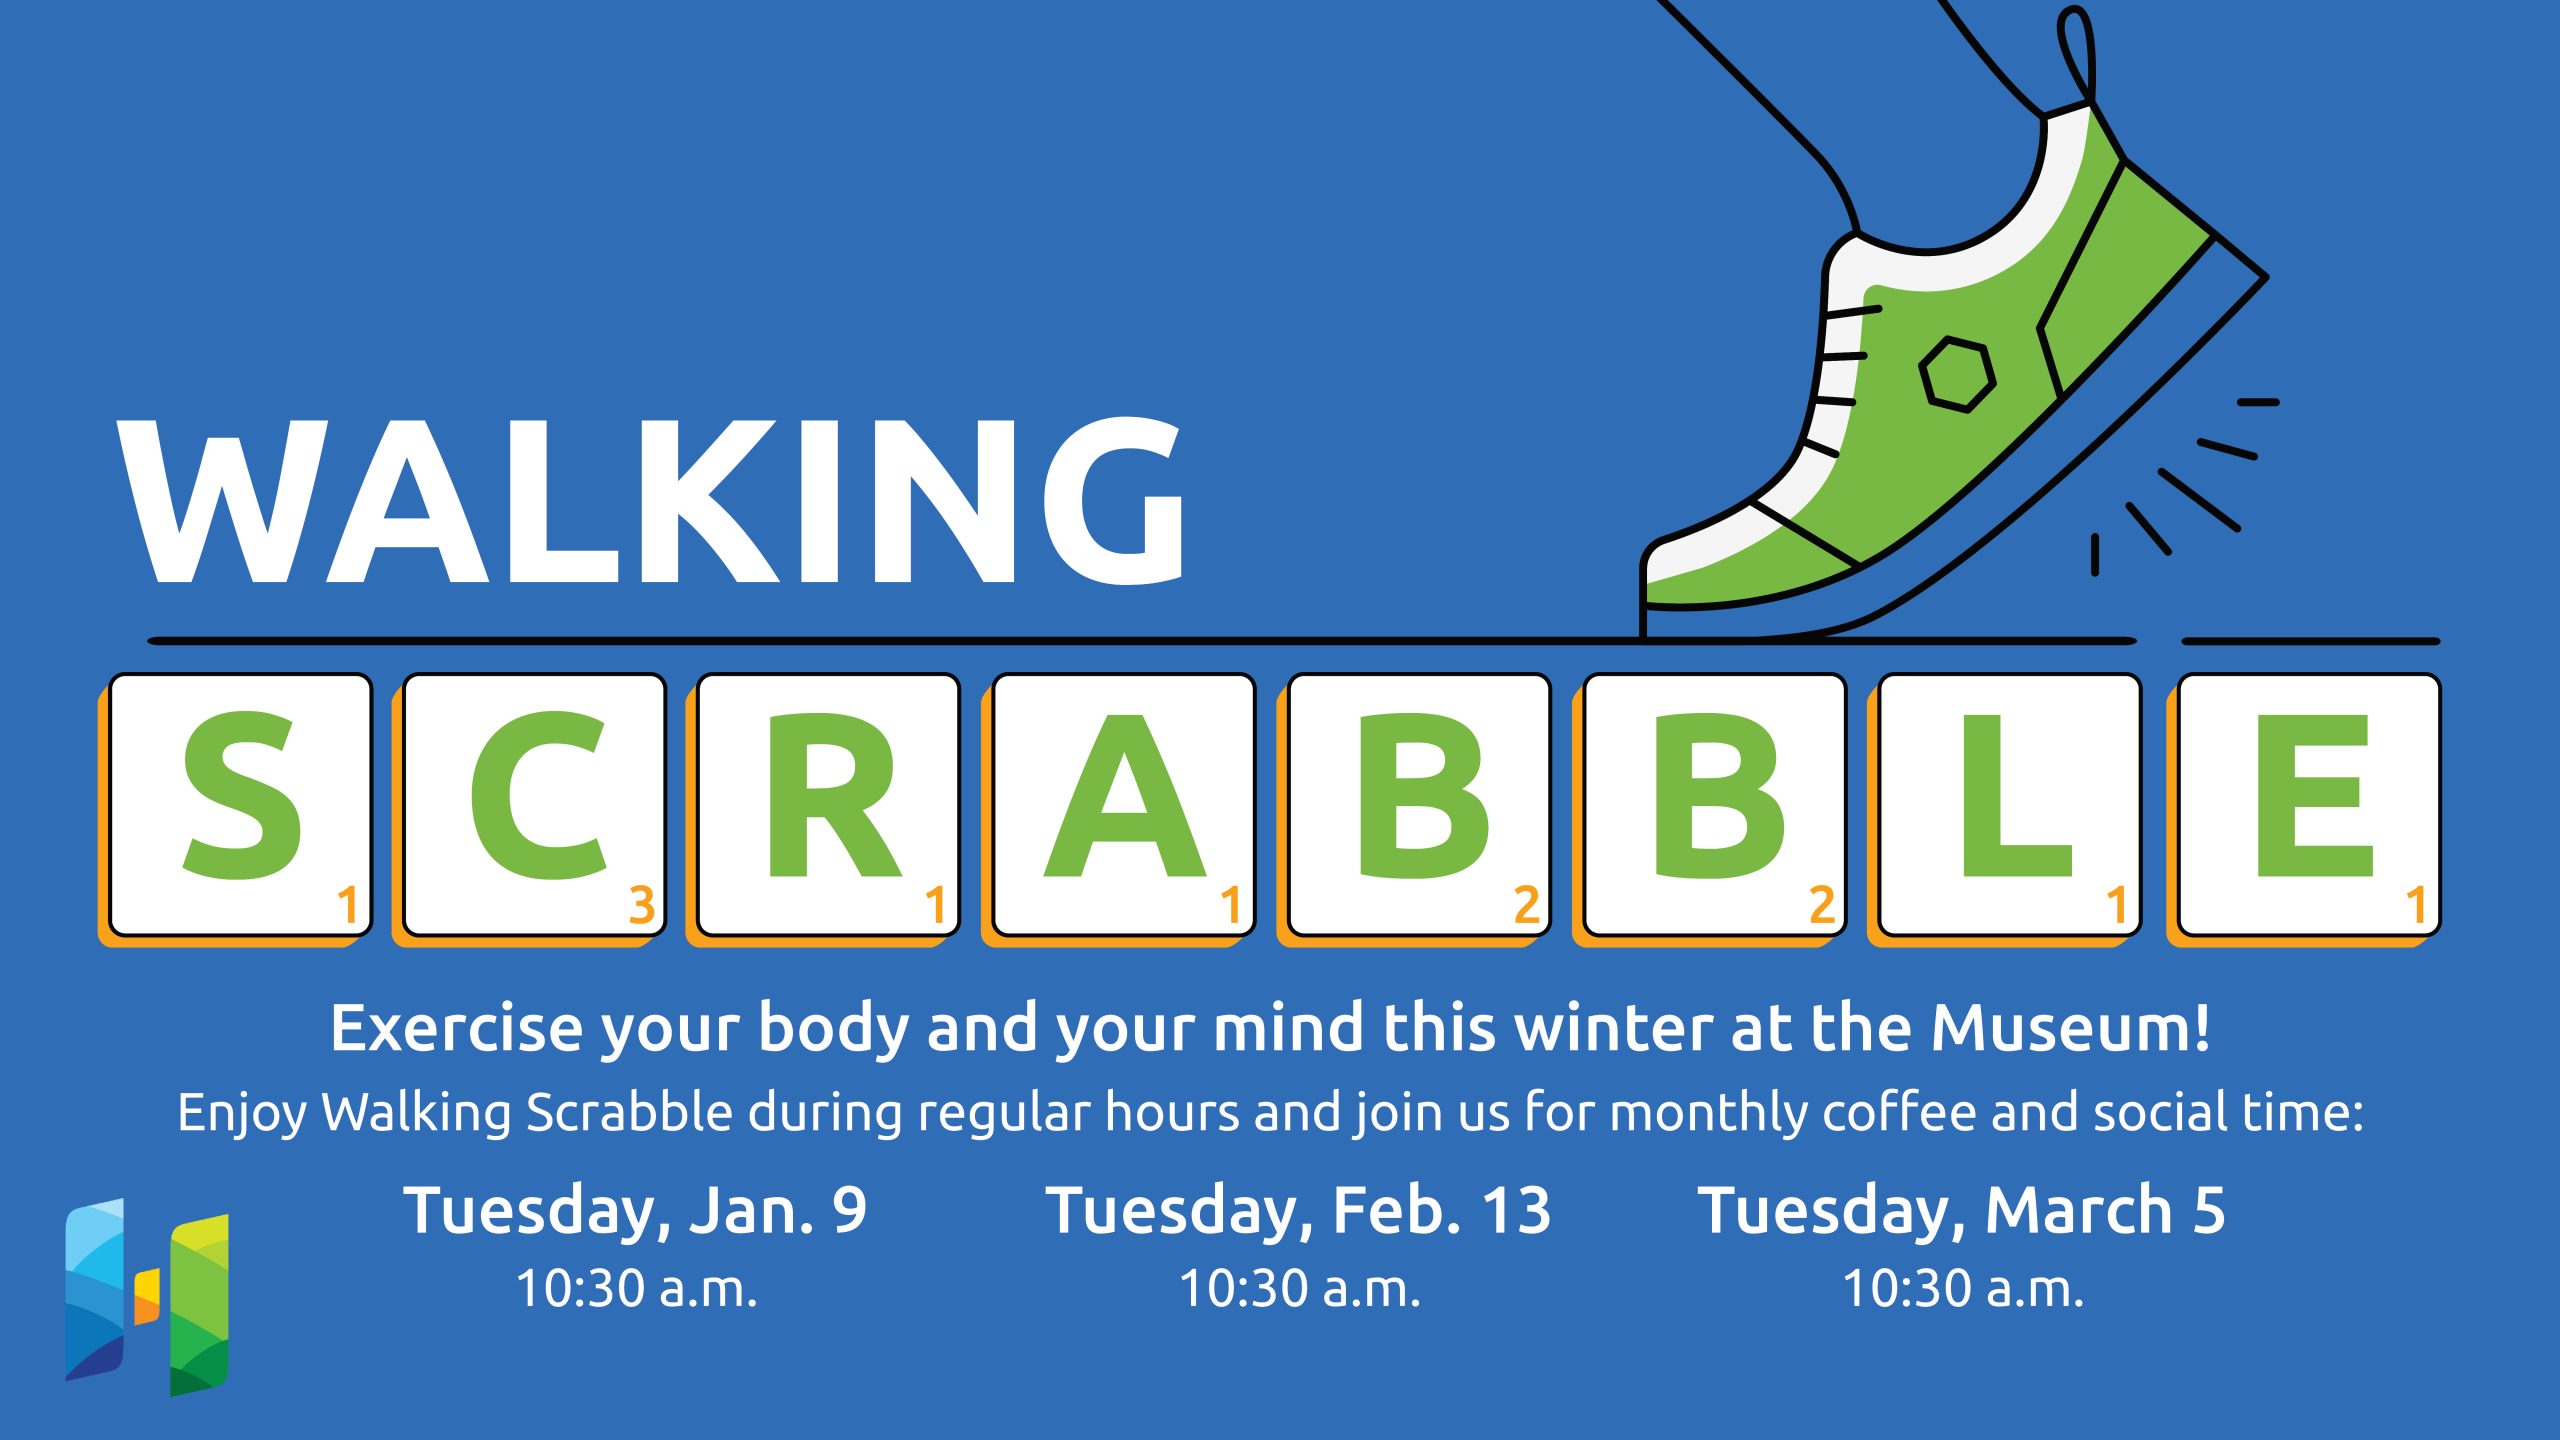 Illustration of a walking show with text promoting Walking Scrabble at the Museum